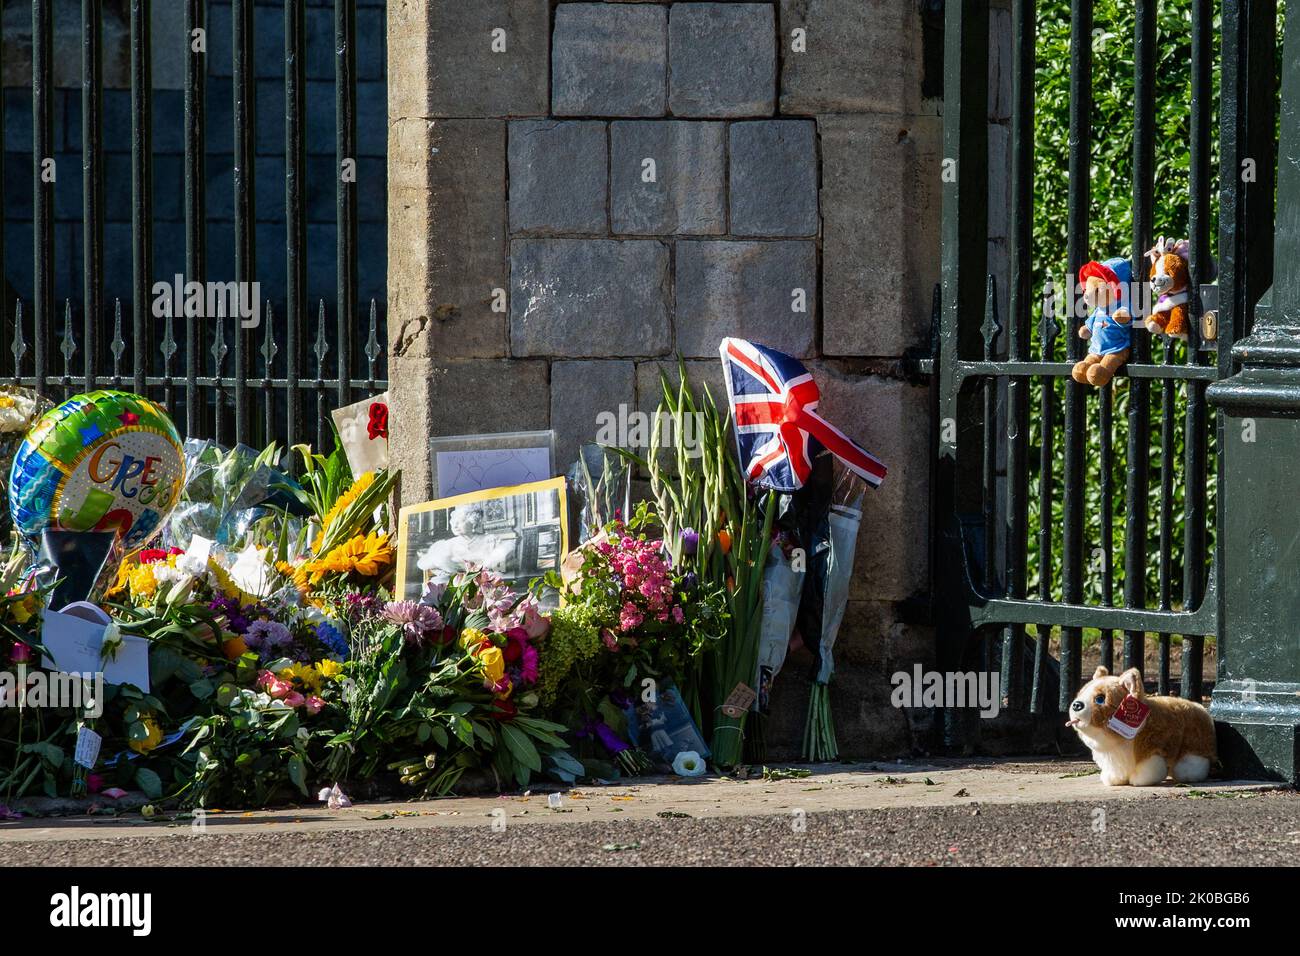 Windsor, UK. 10th September, 2022. A toy corgi dog is pictured alongside floral tributes left in memory of Queen Elizabeth II outside Cambridge Gate at Windsor Castle prior to a walkabout by the Prince and Princess of Wales and the Duke and Duchess of Sussex. Queen Elizabeth II, the UK's longest-serving monarch, died at Balmoral aged 96 on 8th September 2022 after a reign lasting 70 years. Credit: Mark Kerrison/Alamy Live News Stock Photo